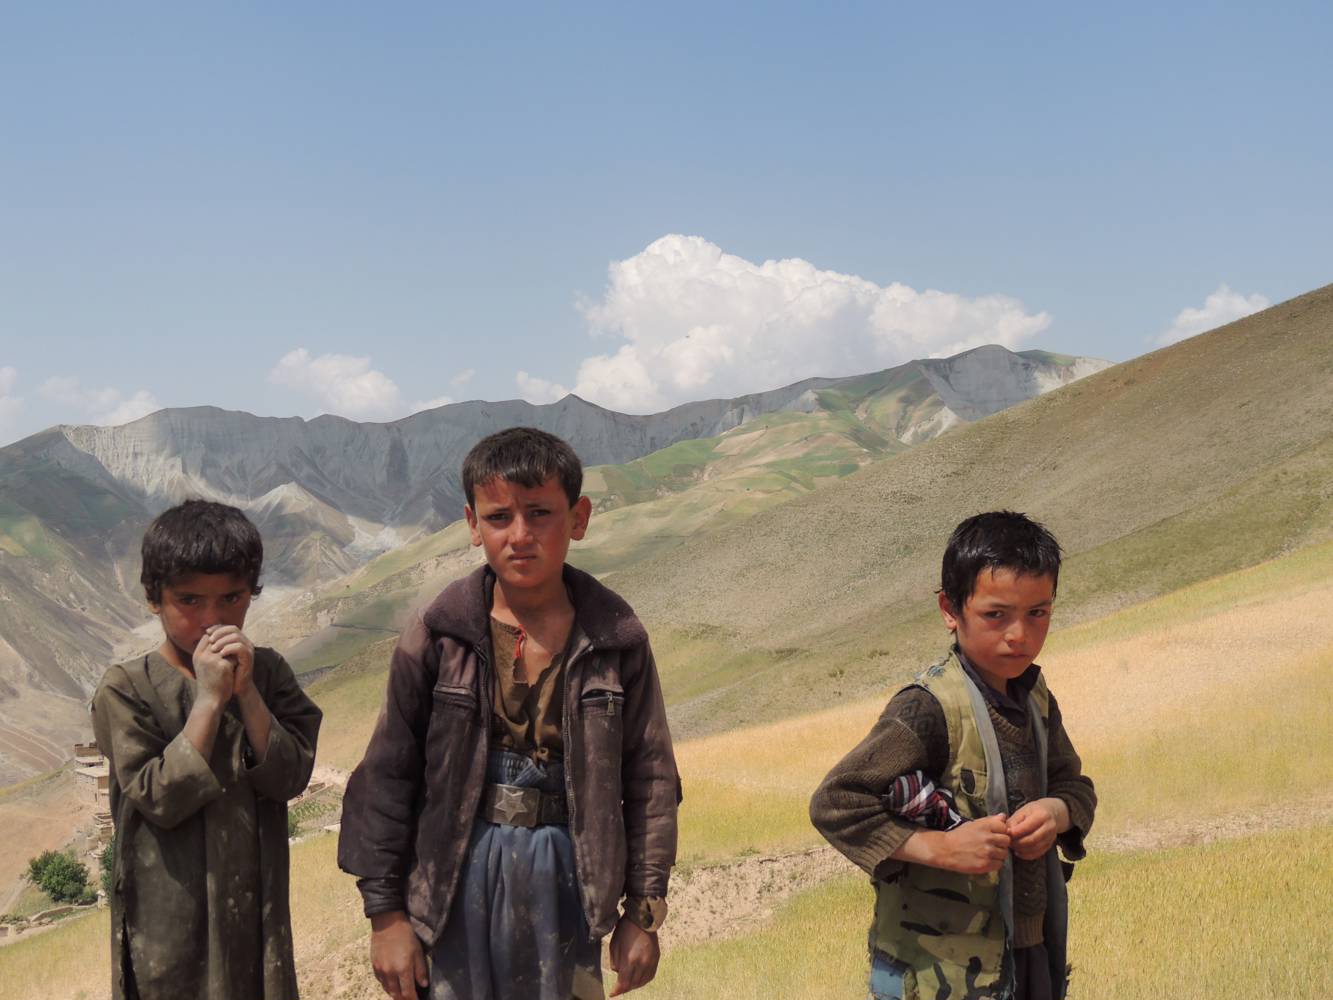 Boys in Badakhshan: do they have a brighter future? 2013. Norwegian Afghanistan Committee